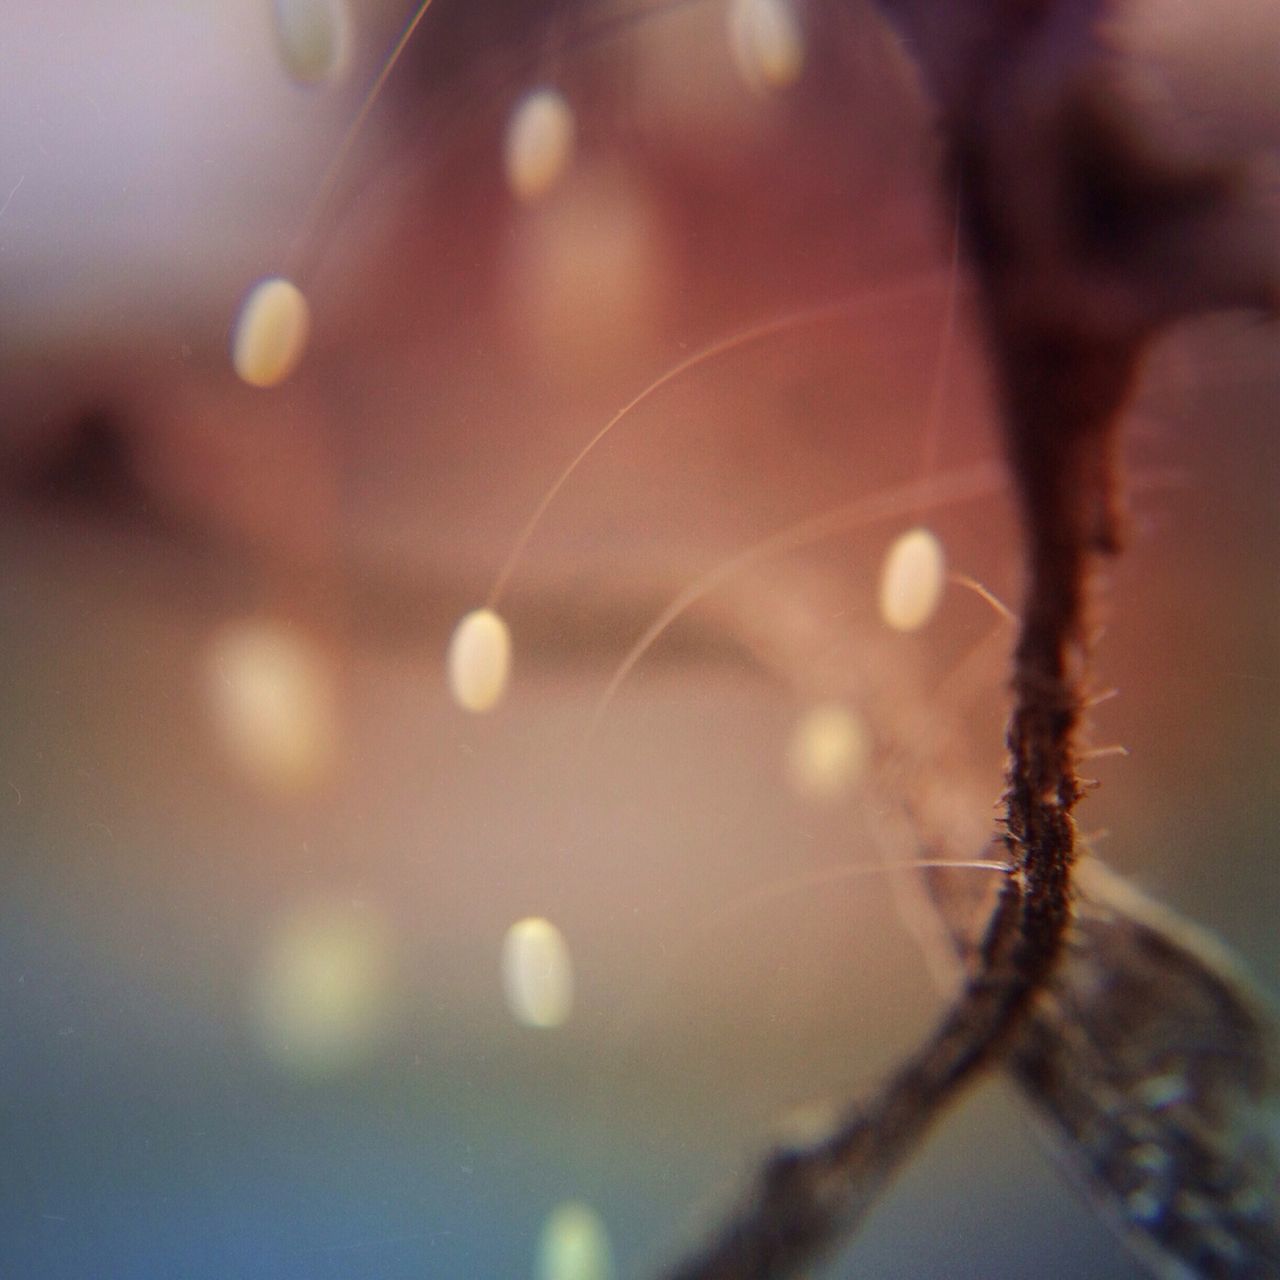 focus on foreground, close-up, selective focus, illuminated, drop, defocused, water, nature, wet, no people, lens flare, night, spider web, outdoors, season, lighting equipment, pattern, branch, weather